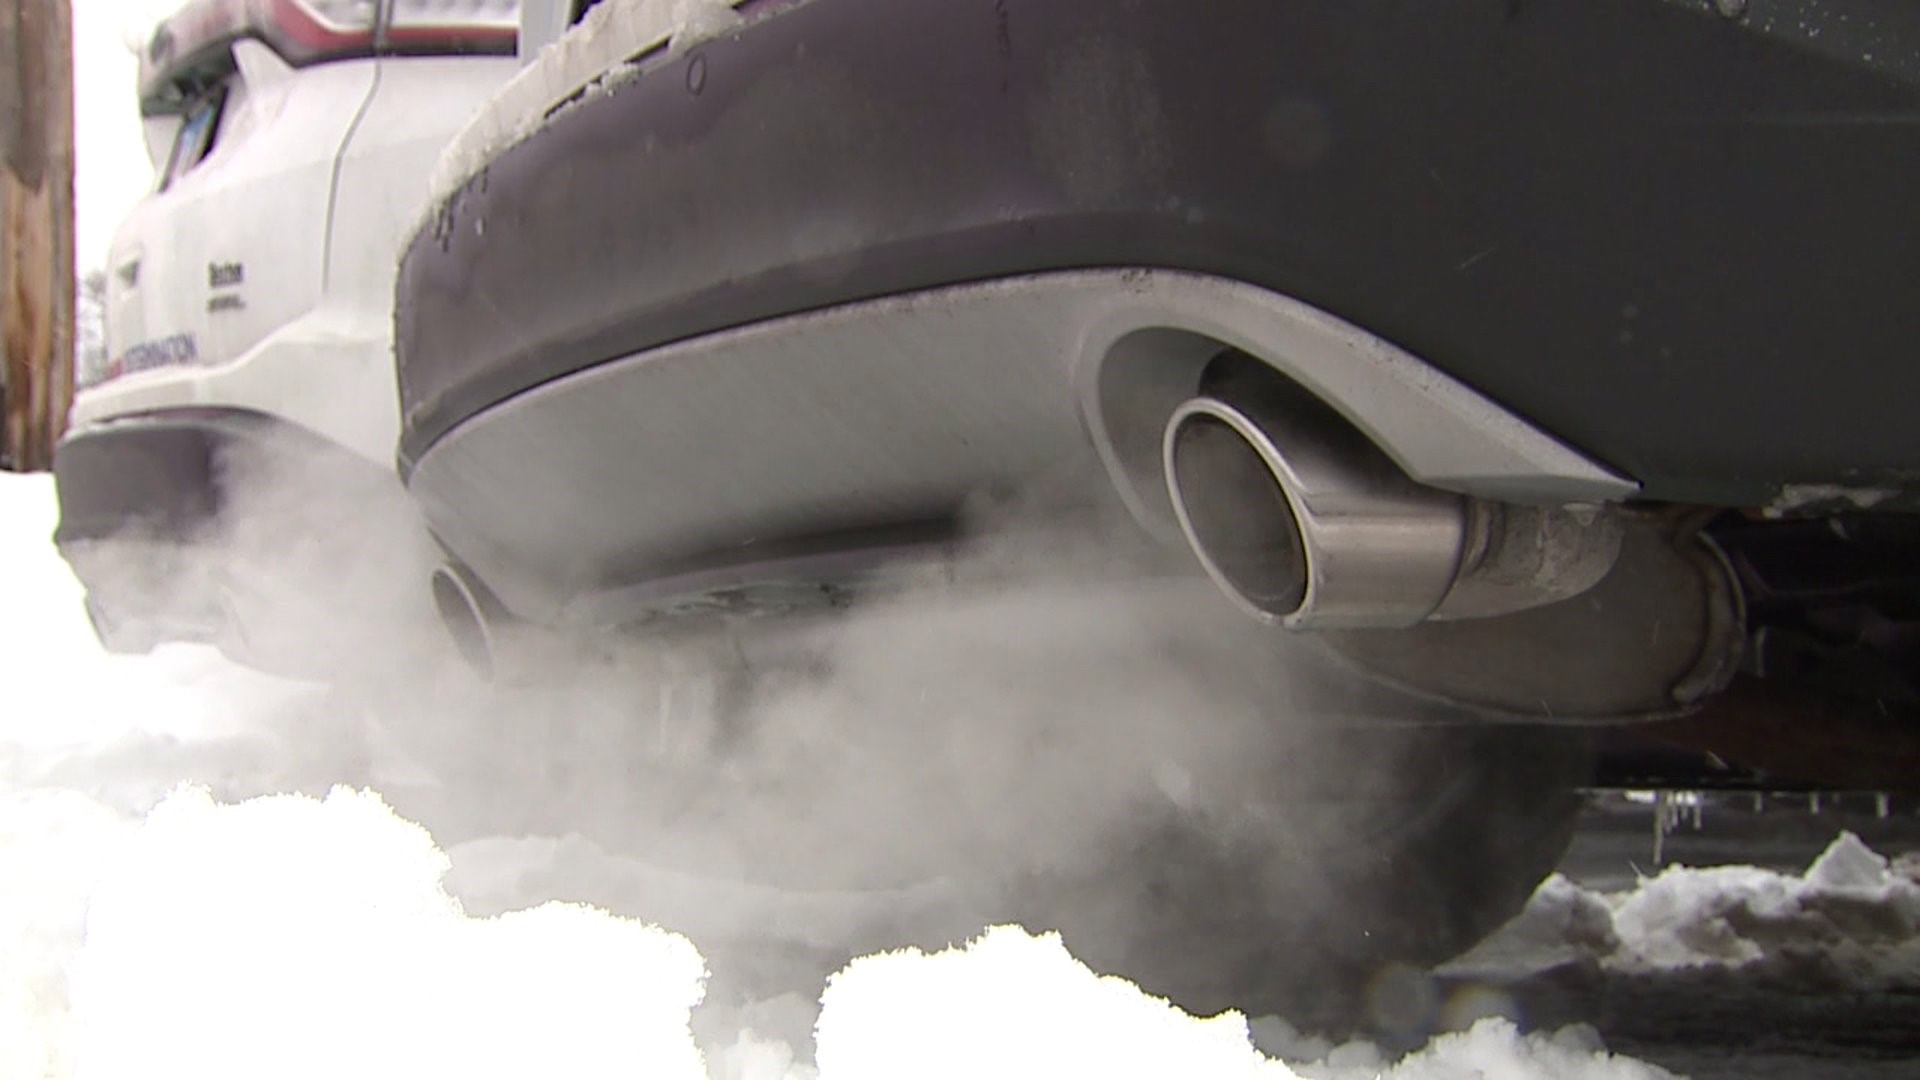 How To Heat A Car How to heat up your car, without fear of having it stolen | wqad.com